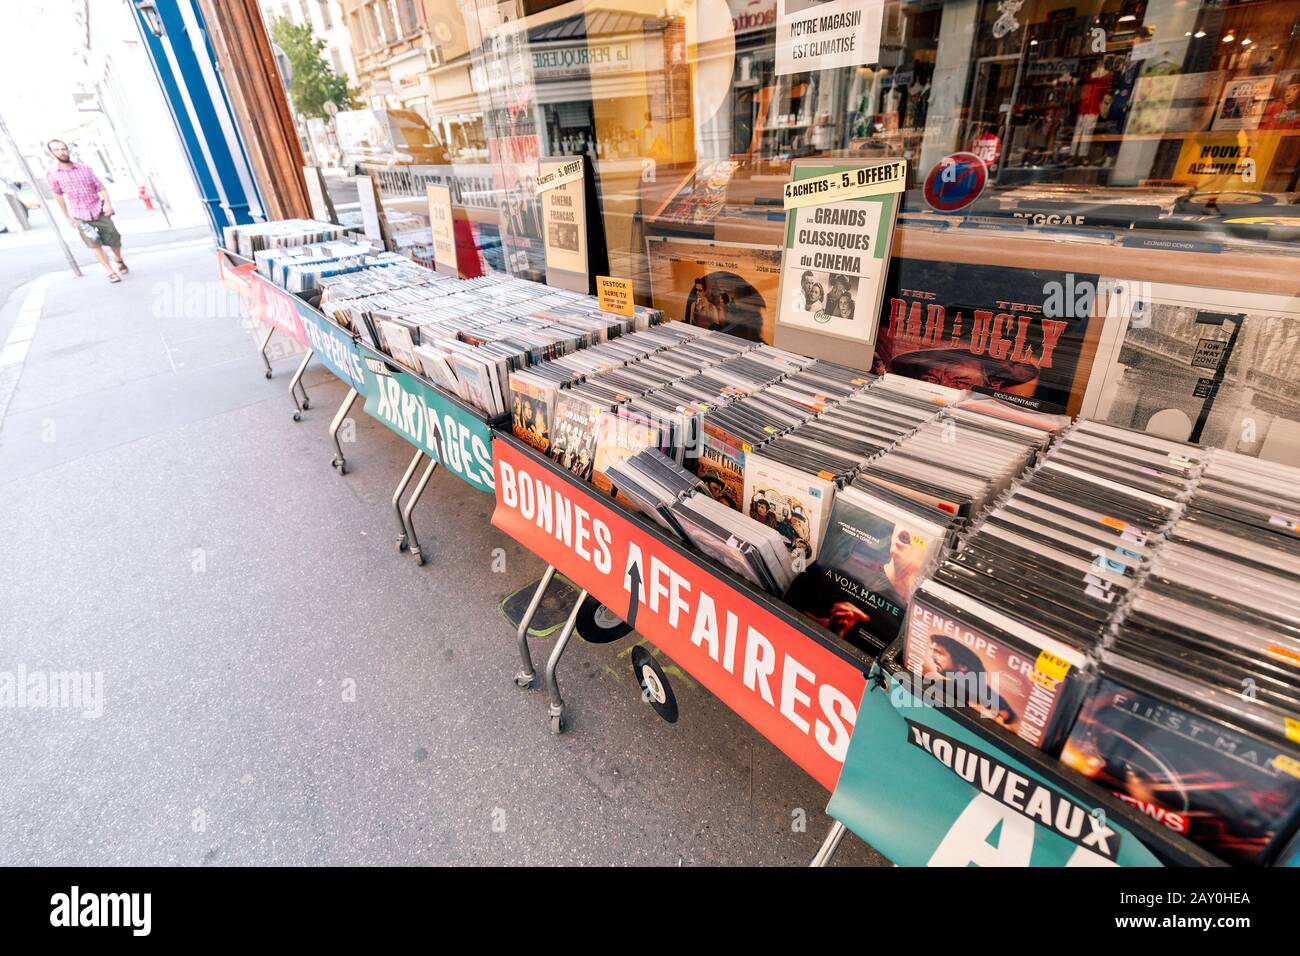 23 July 2019, Lyon, France: Old dvd movies for sale at outdoor flea market at the city street Stock Photo